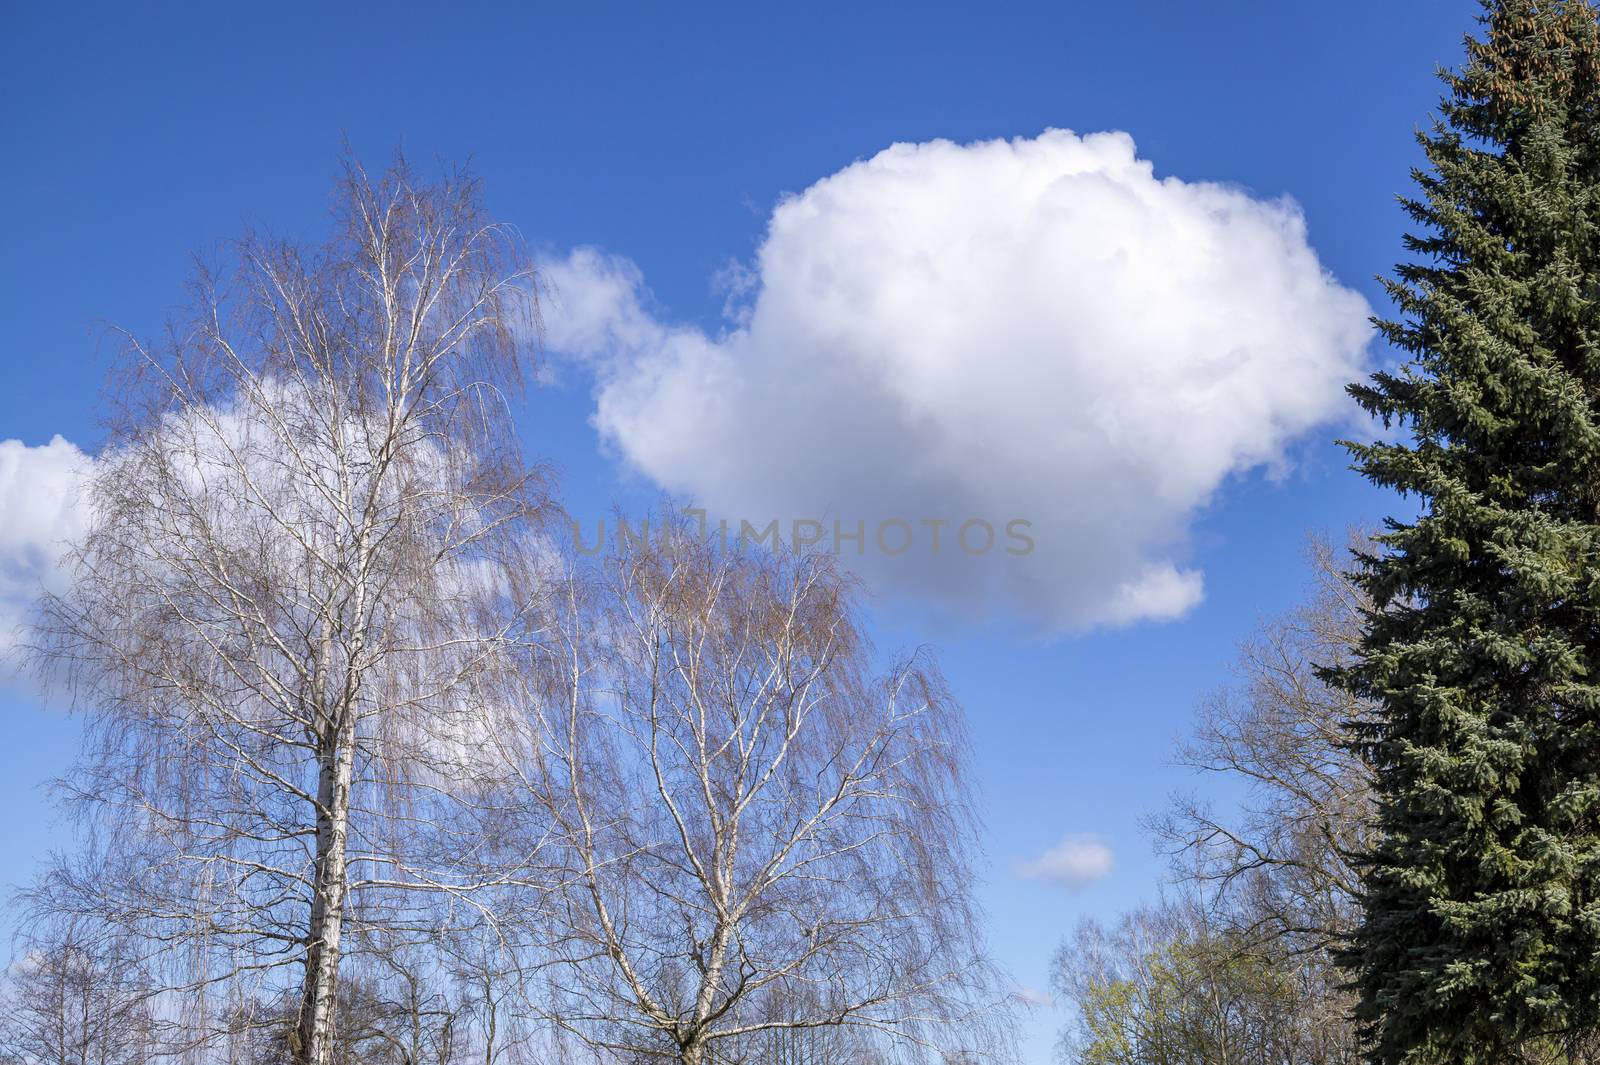 Fluffy white cloud in a sunny blue sky in spring by NetPix